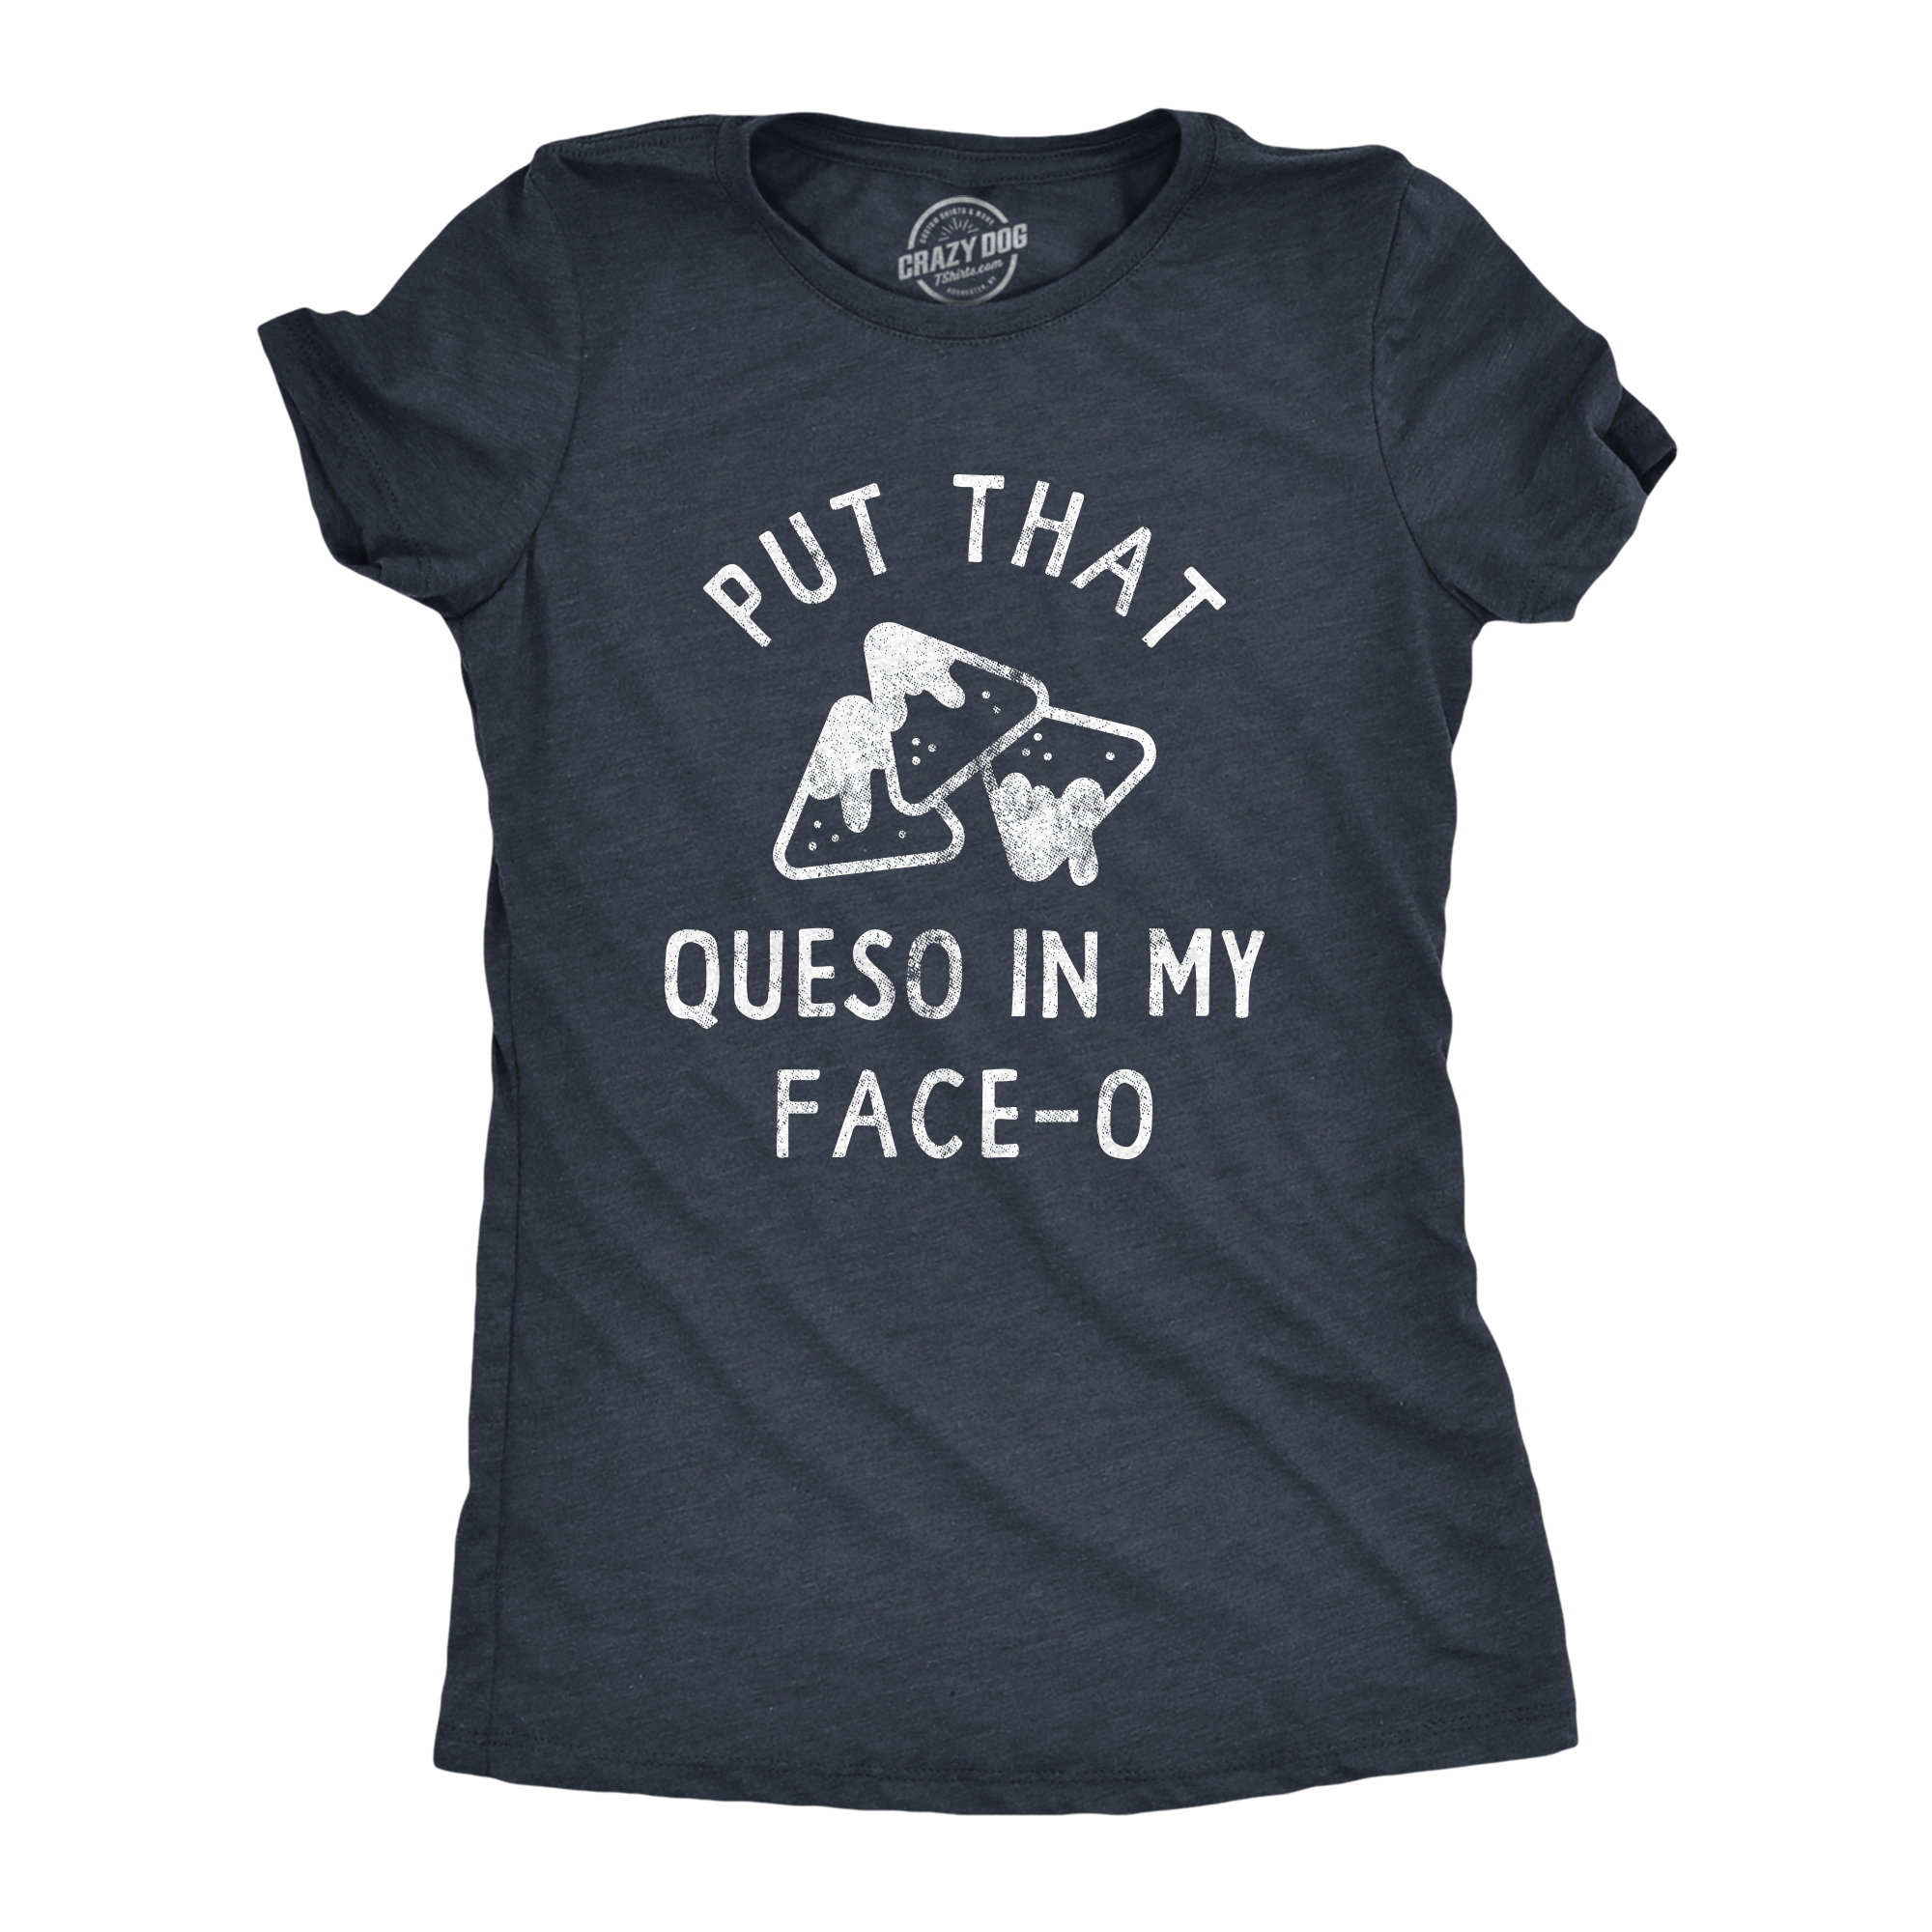 Crazy Dog Tshirts Womens Put That Queso In My Face O T Shirt Funny Nacho Chips Cheese Joke Tee For Ladies